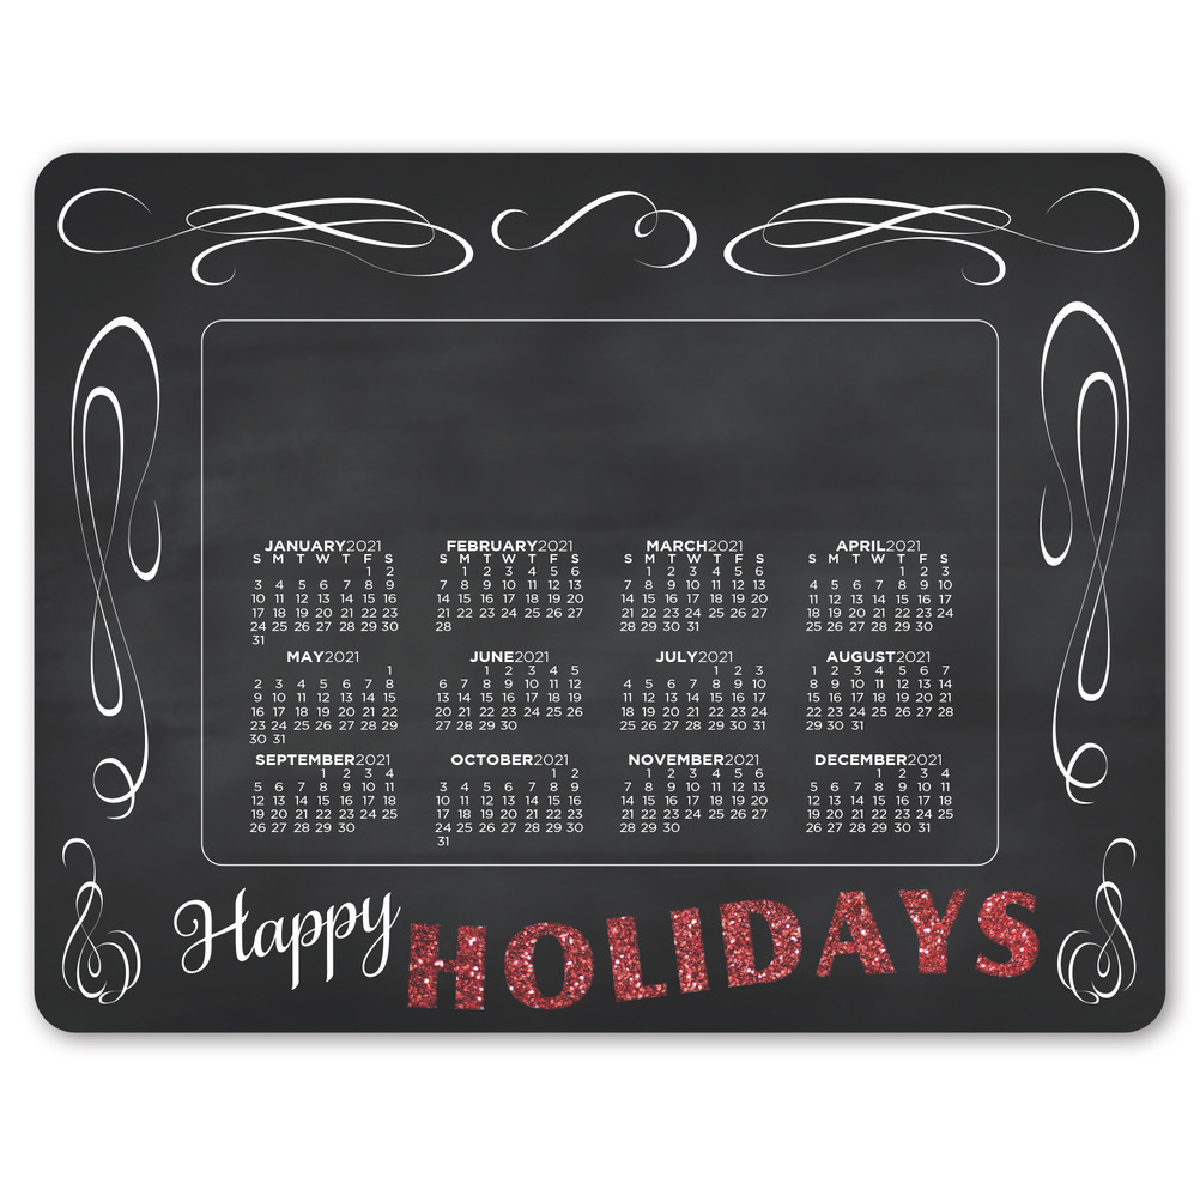 Black Happy Holidays Holiday Picture Frame w/ Calendar Magnet